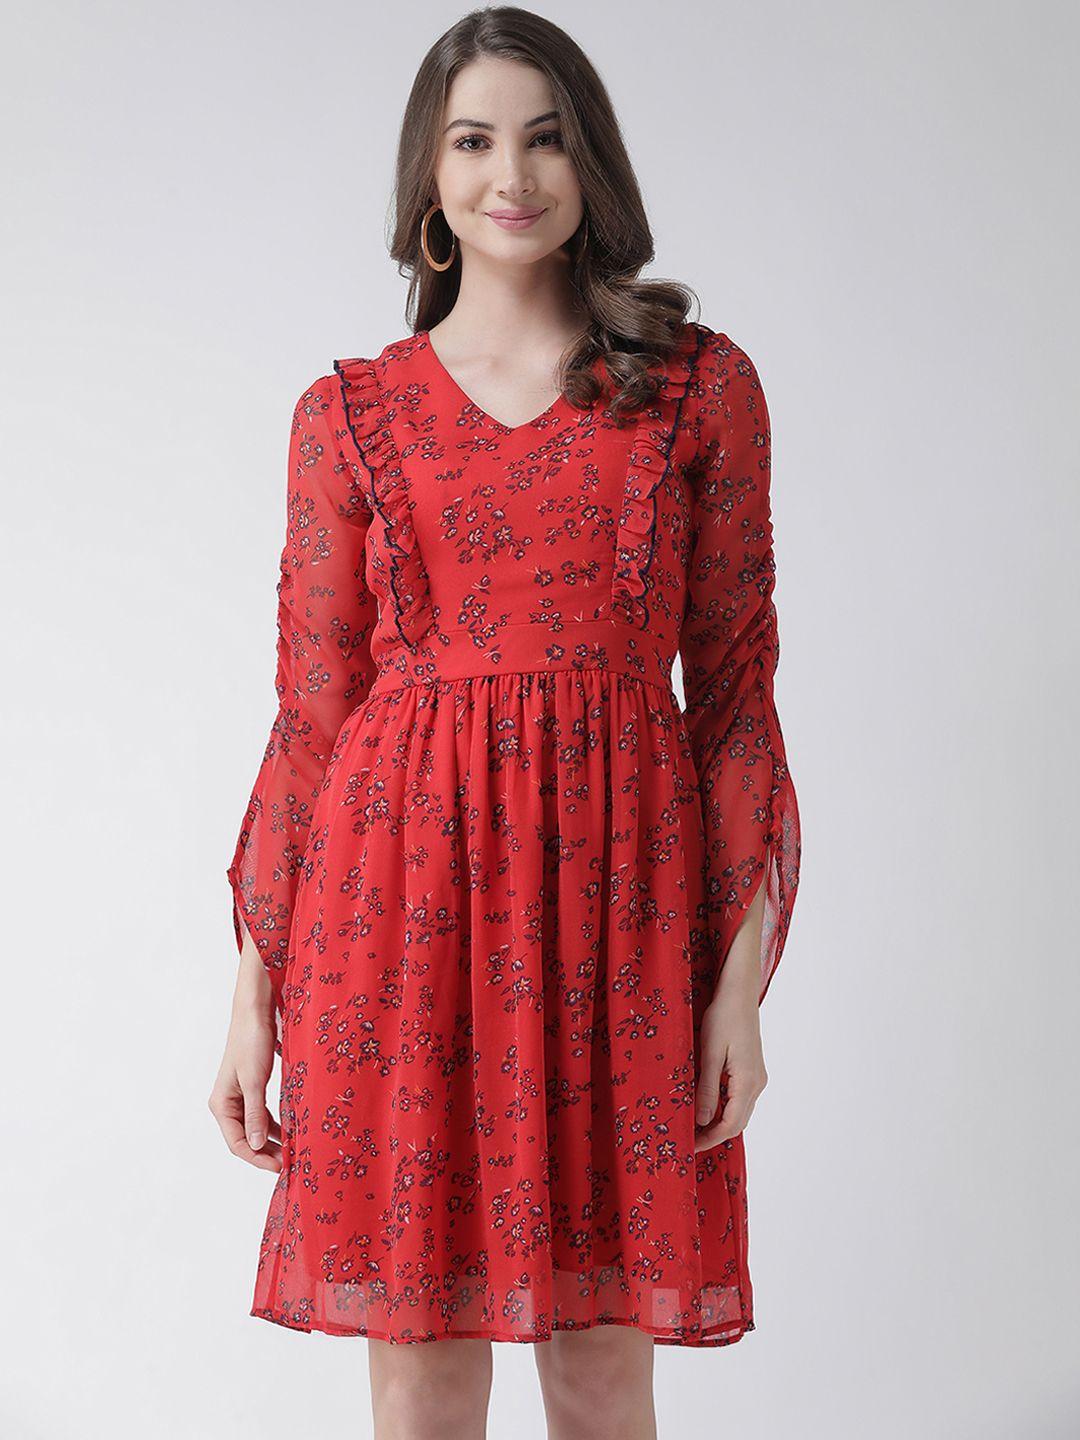 kassually-women-red-printed-fit-and-flare-dress